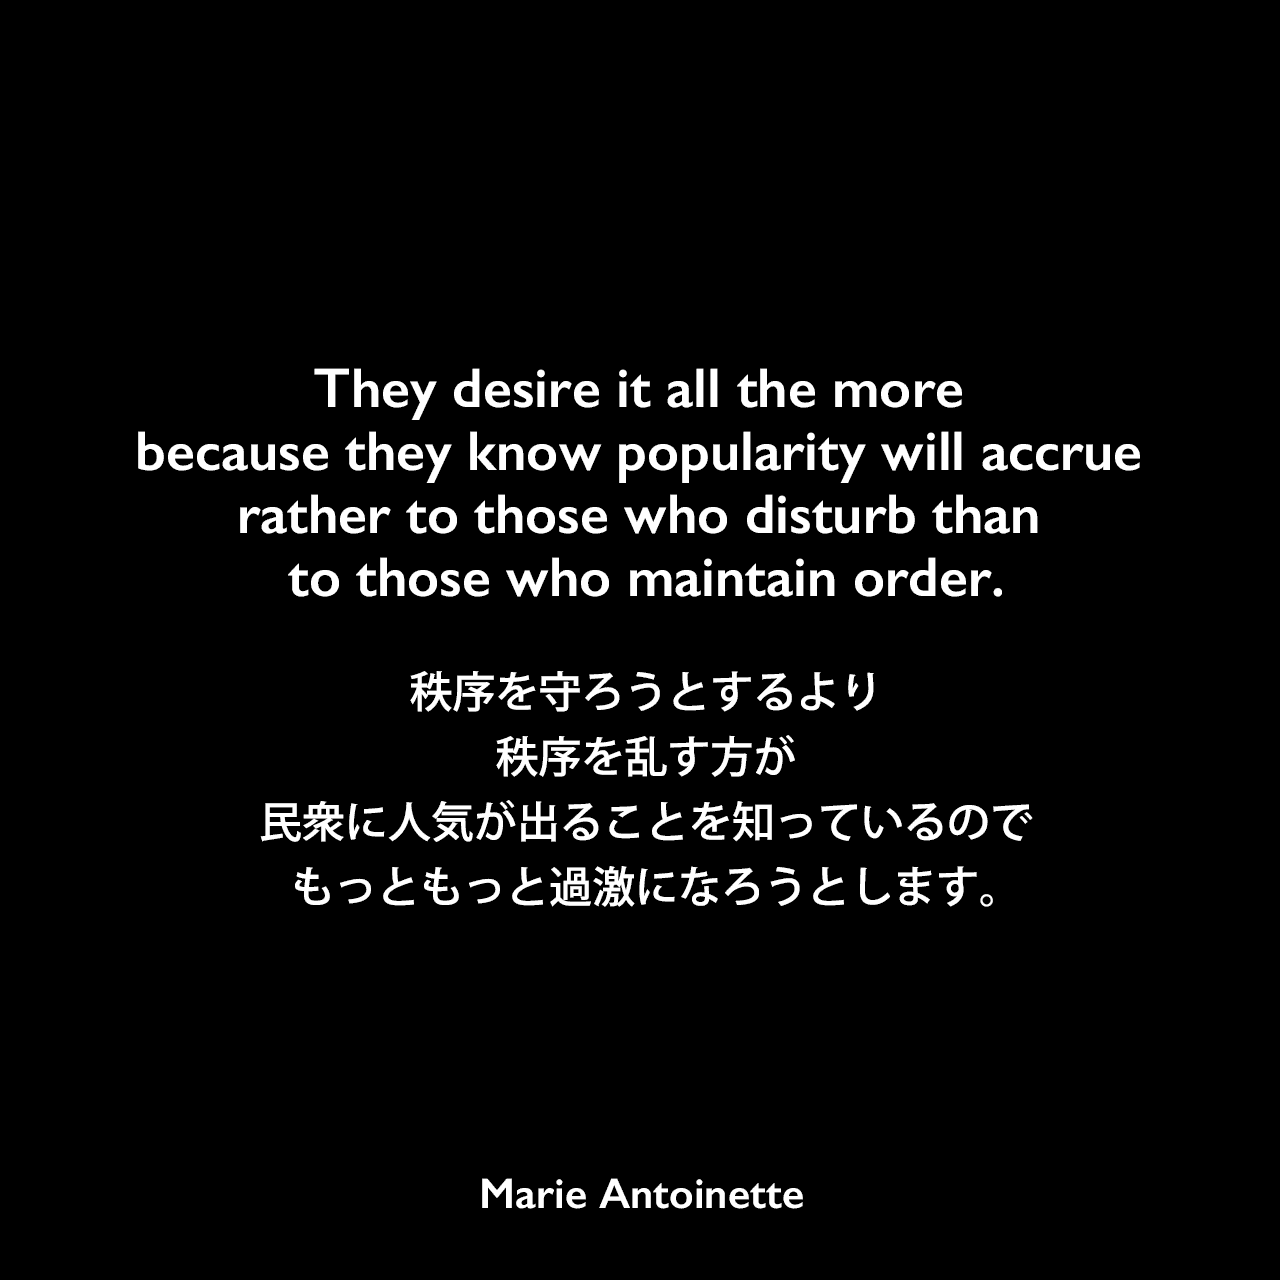 They desire it all the more because they know popularity will accrue rather to those who disturb than to those who maintain order.秩序を守ろうとするより秩序を乱す方が民衆に人気が出ることを知っているので、もっともっと過激になろうとします。Marie Antoinette